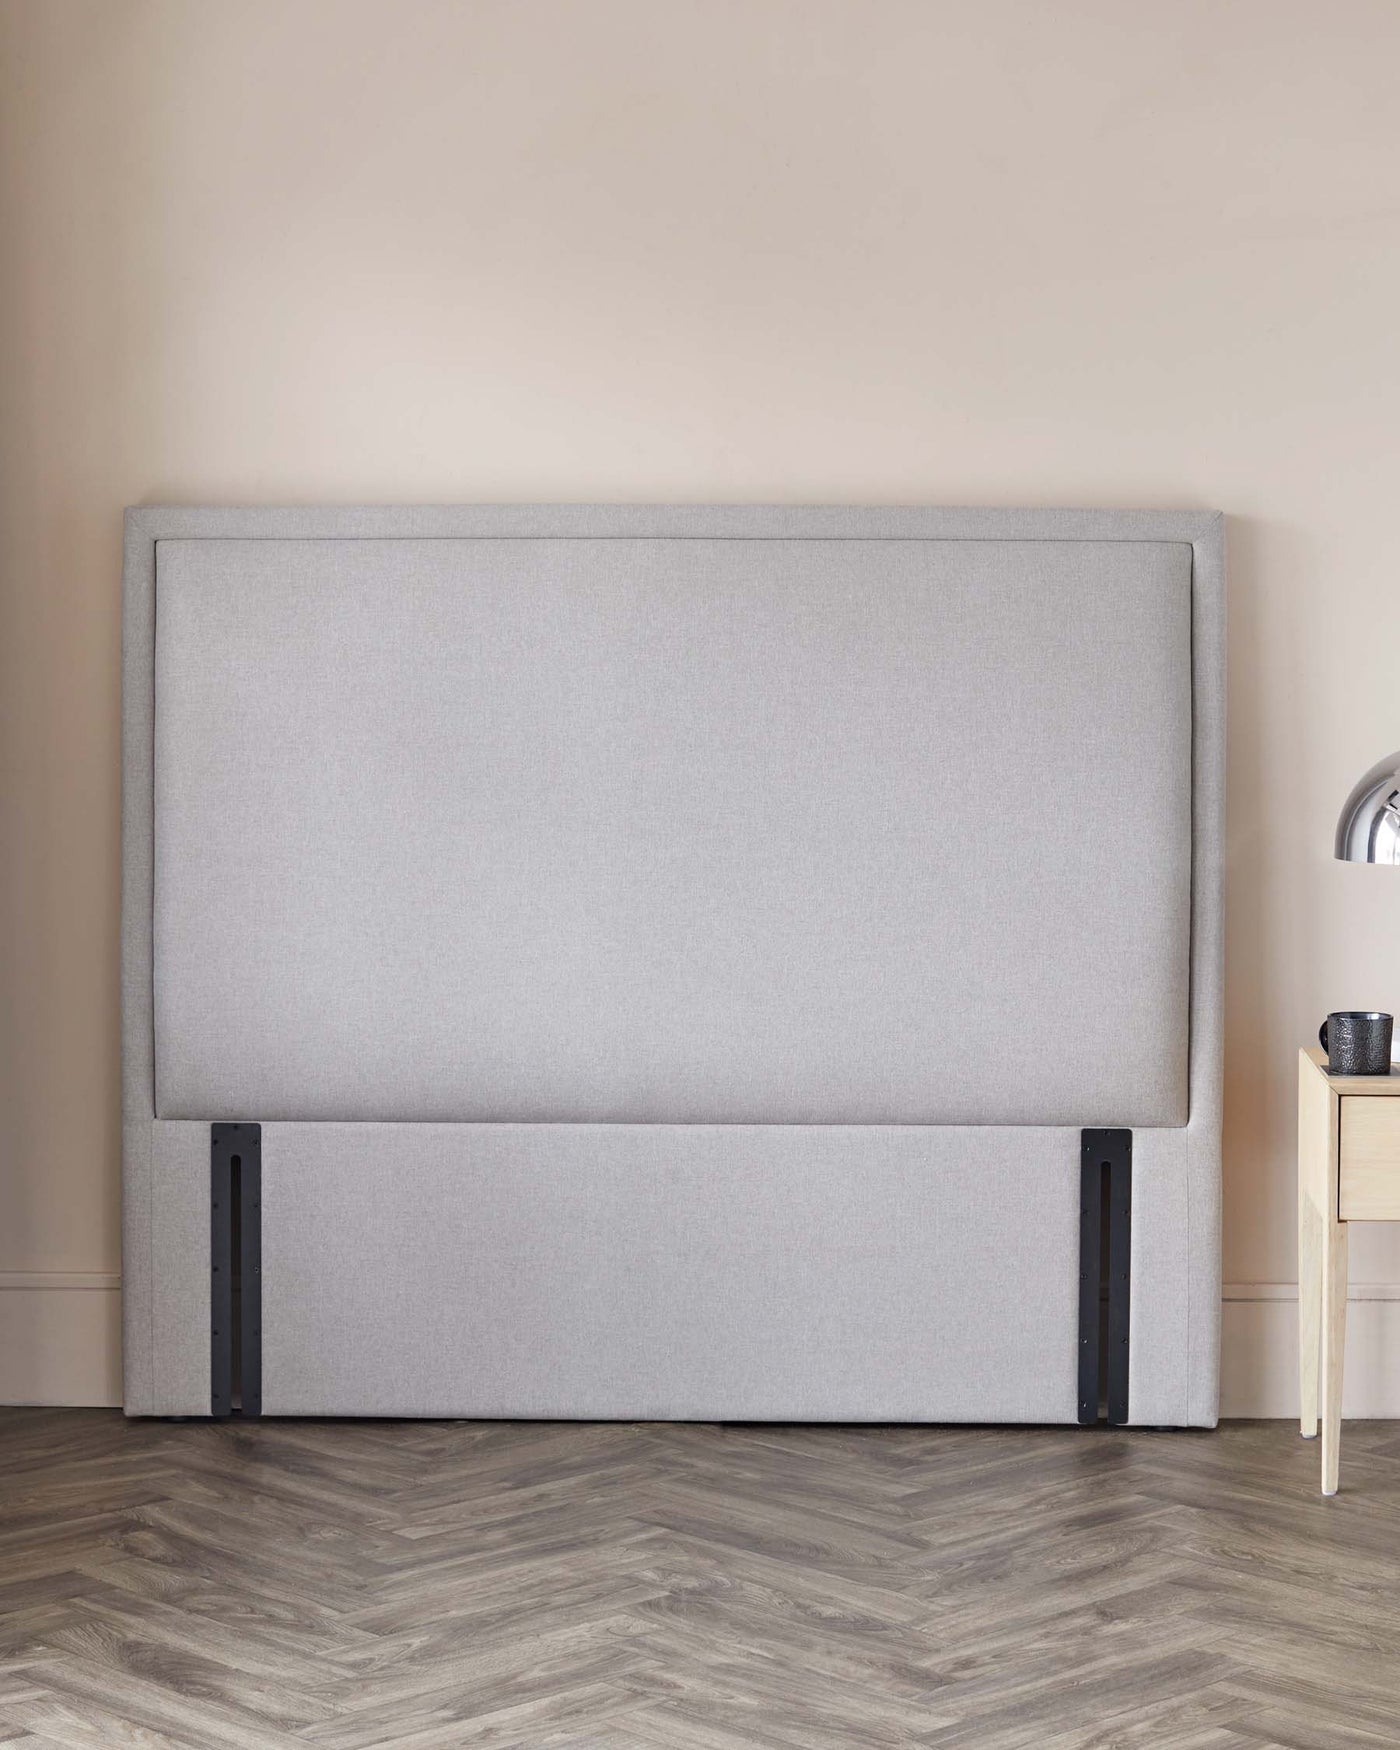 Minimalist-style, contemporary light grey upholstered headboard for a bed, featuring clean lines and a soft fabric finish, flanked by black metal legs. A small wooden side table with a white top and natural wood legs is seen to the right.